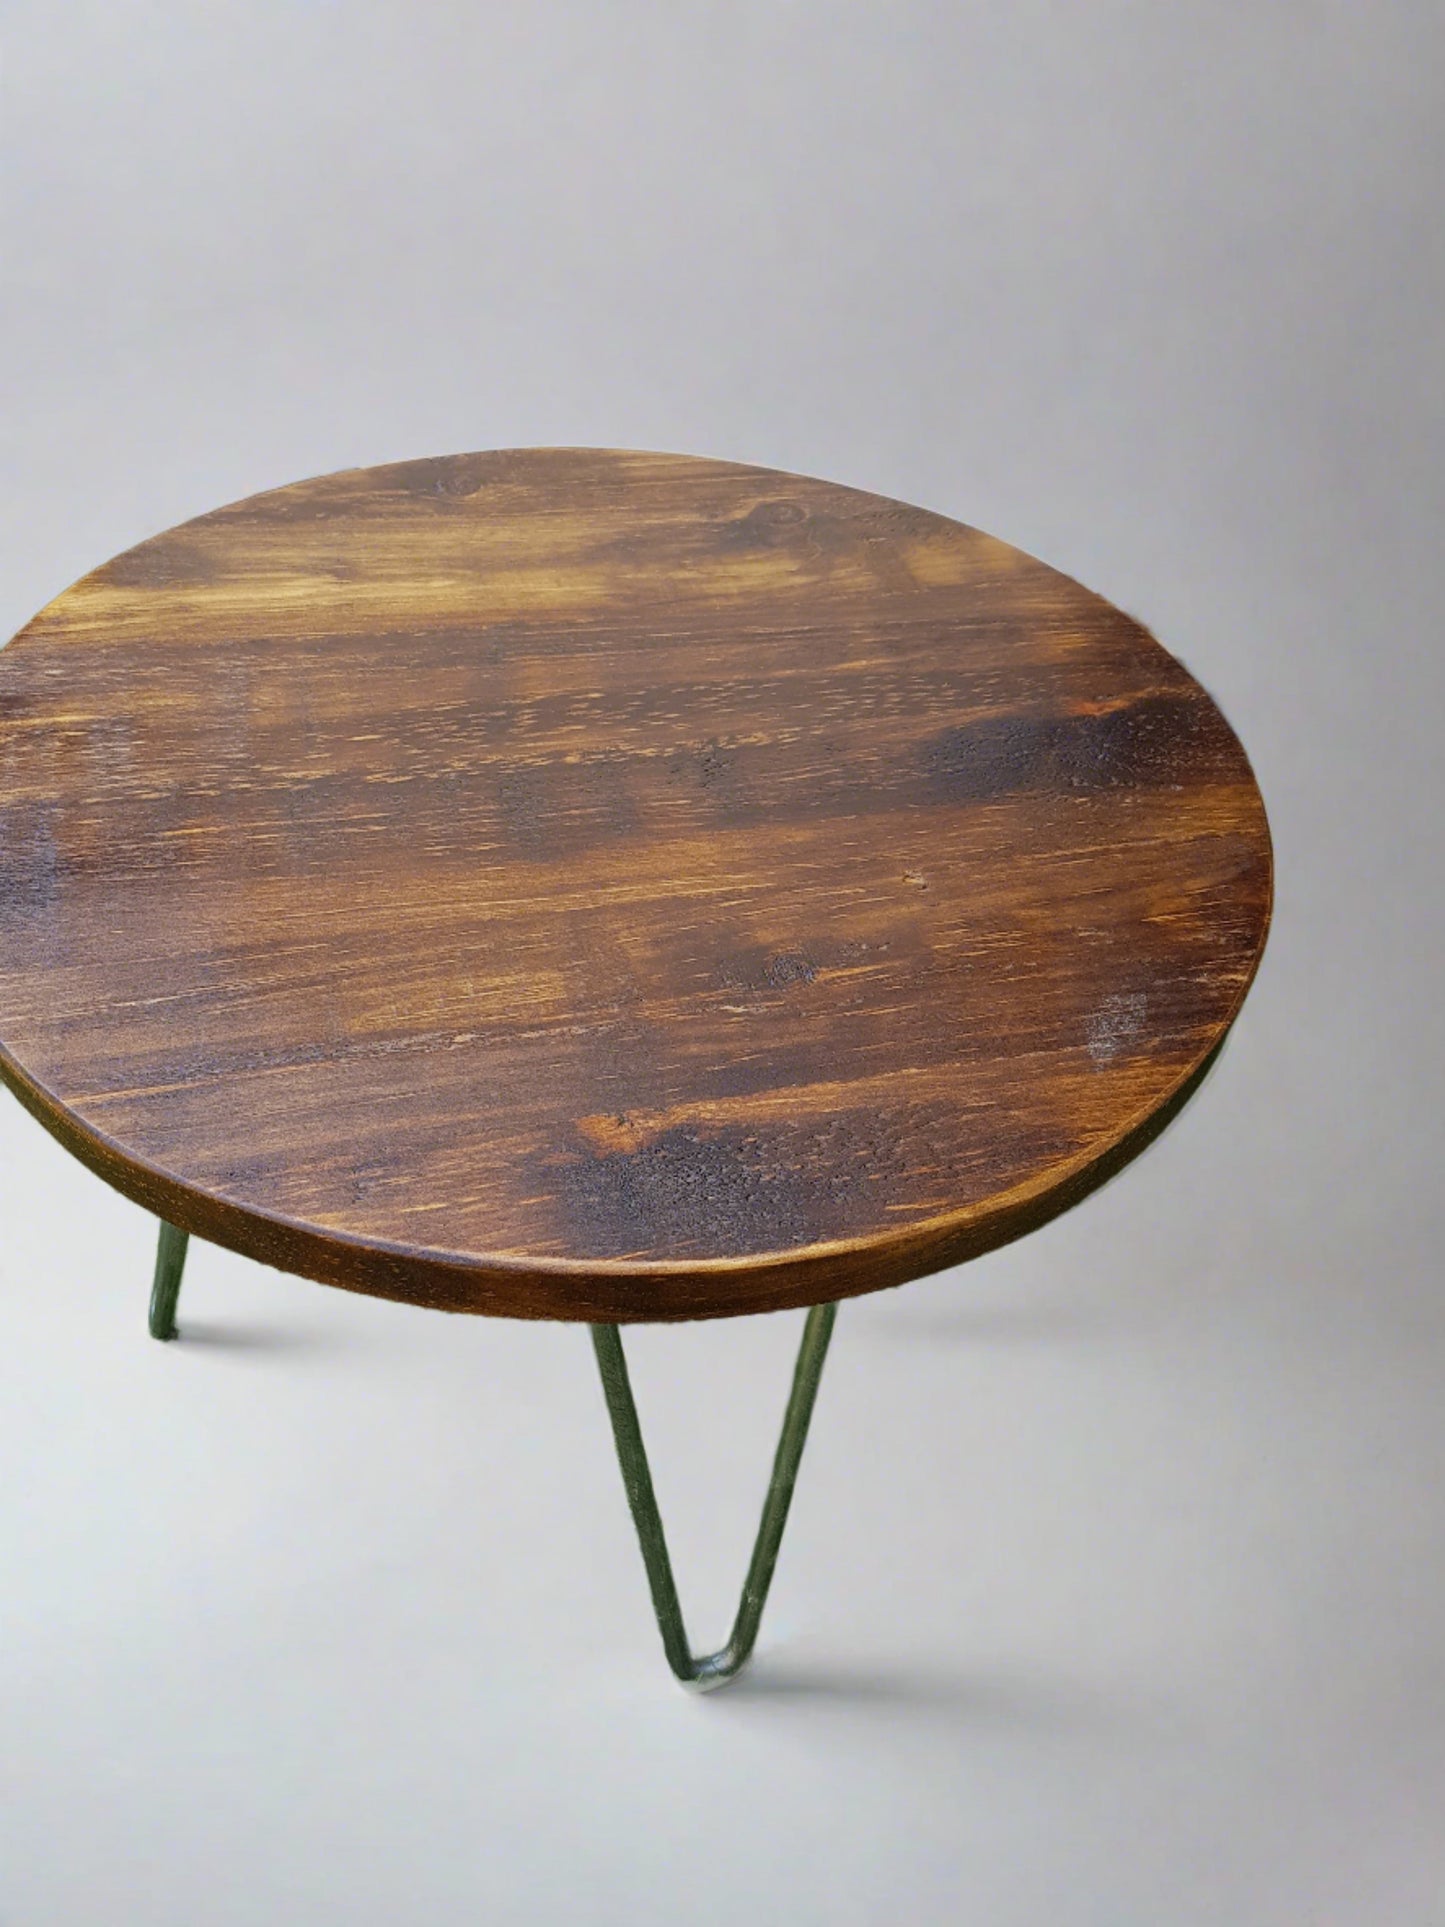 Rustic Industrial Coffee Table, Round Low Table, Side Table, Made with Solid Wood - Available in many Colours!